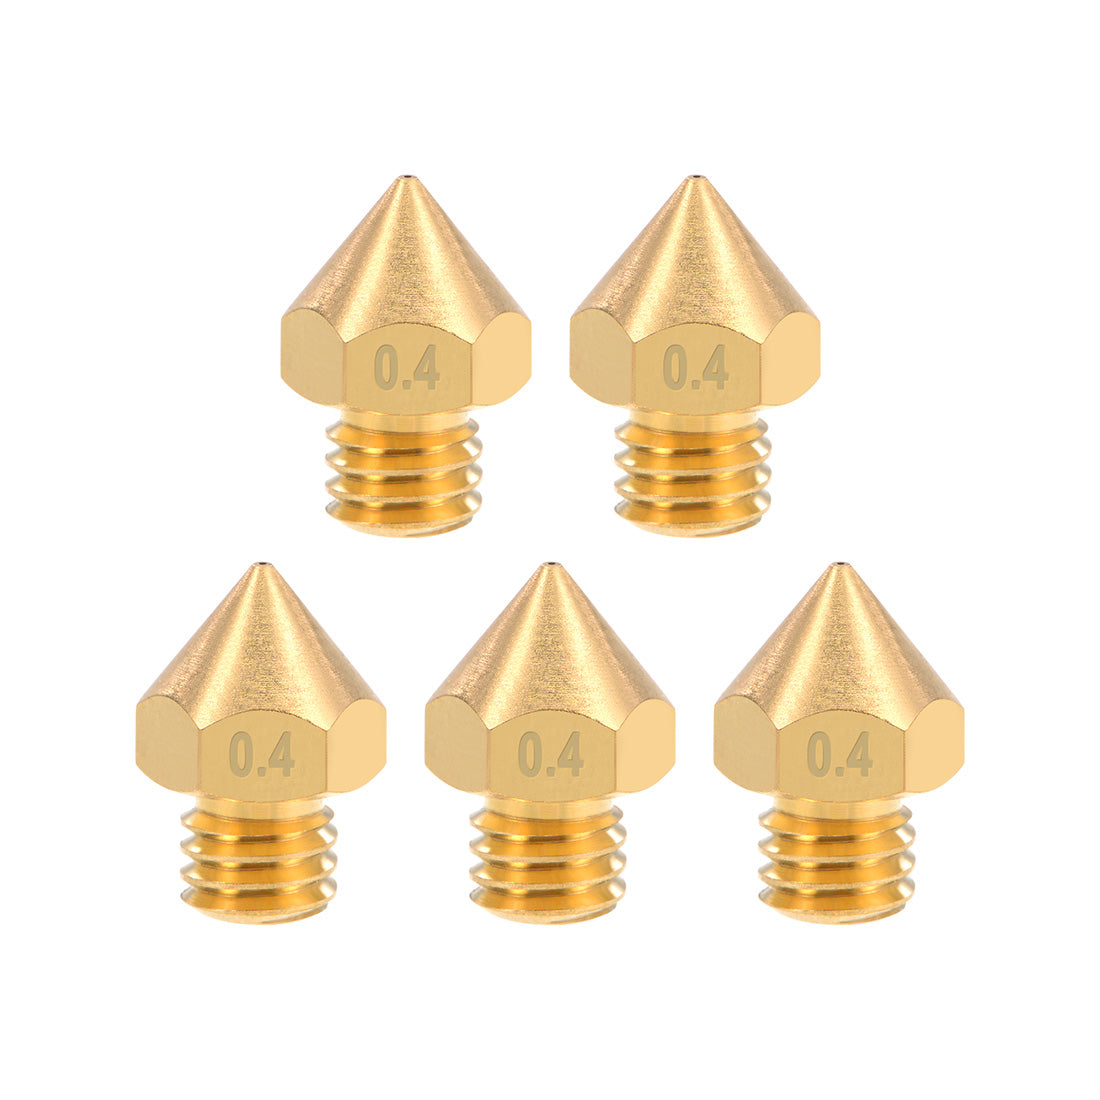 uxcell Uxcell 0.4mm 3D Printer Nozzles Head M6 for MK8 1.75mm Extruder Print, Brass 5pcs